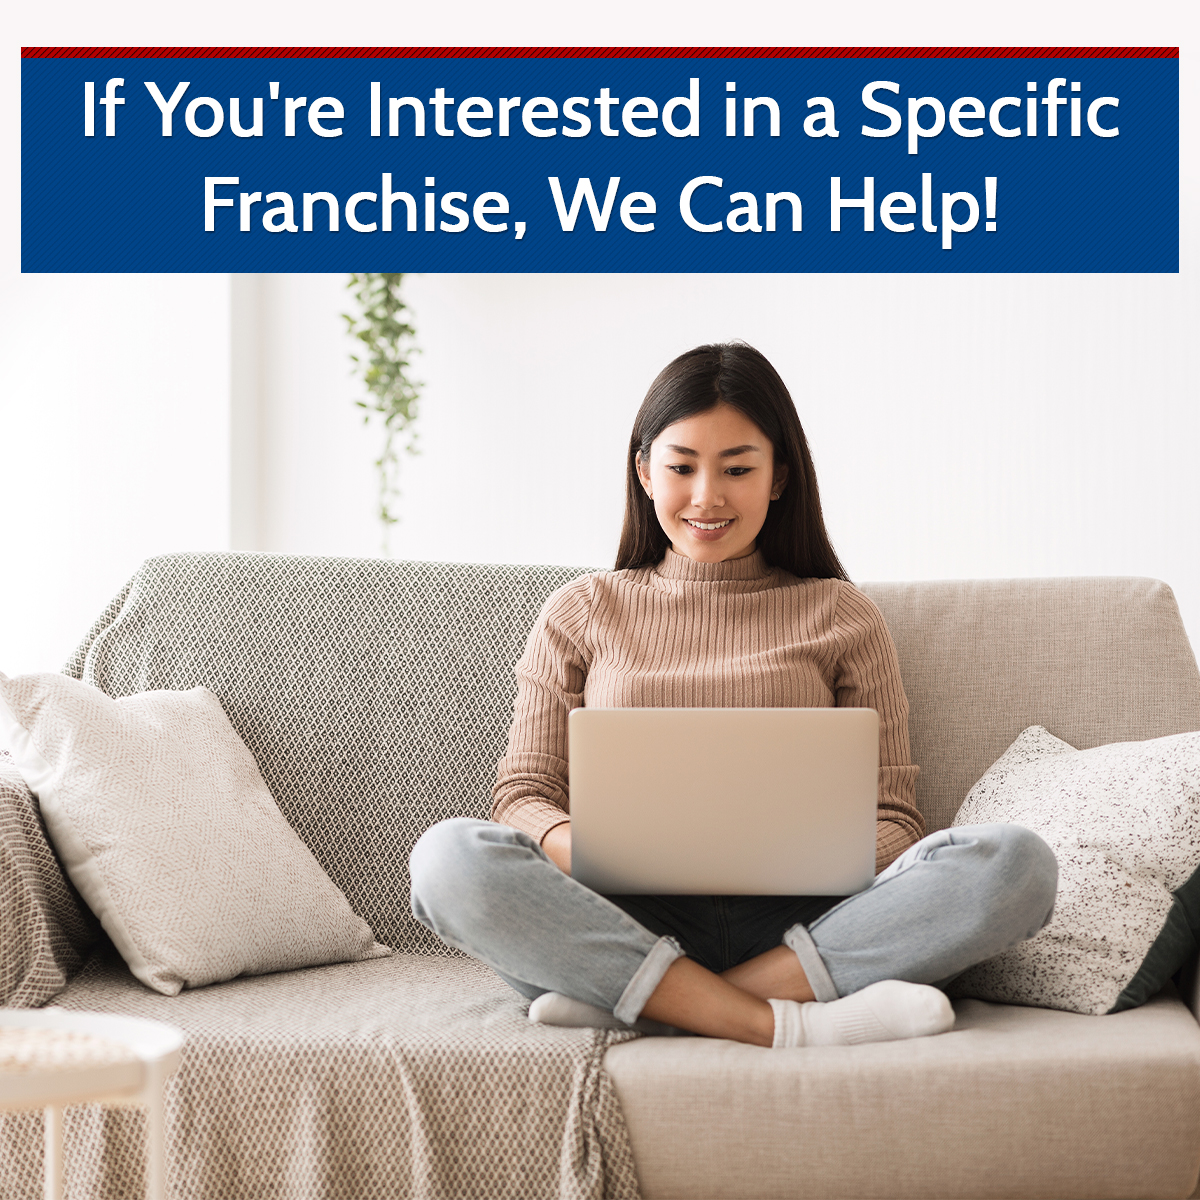 If You're Interested in a Specific Franchise, We Can Help!